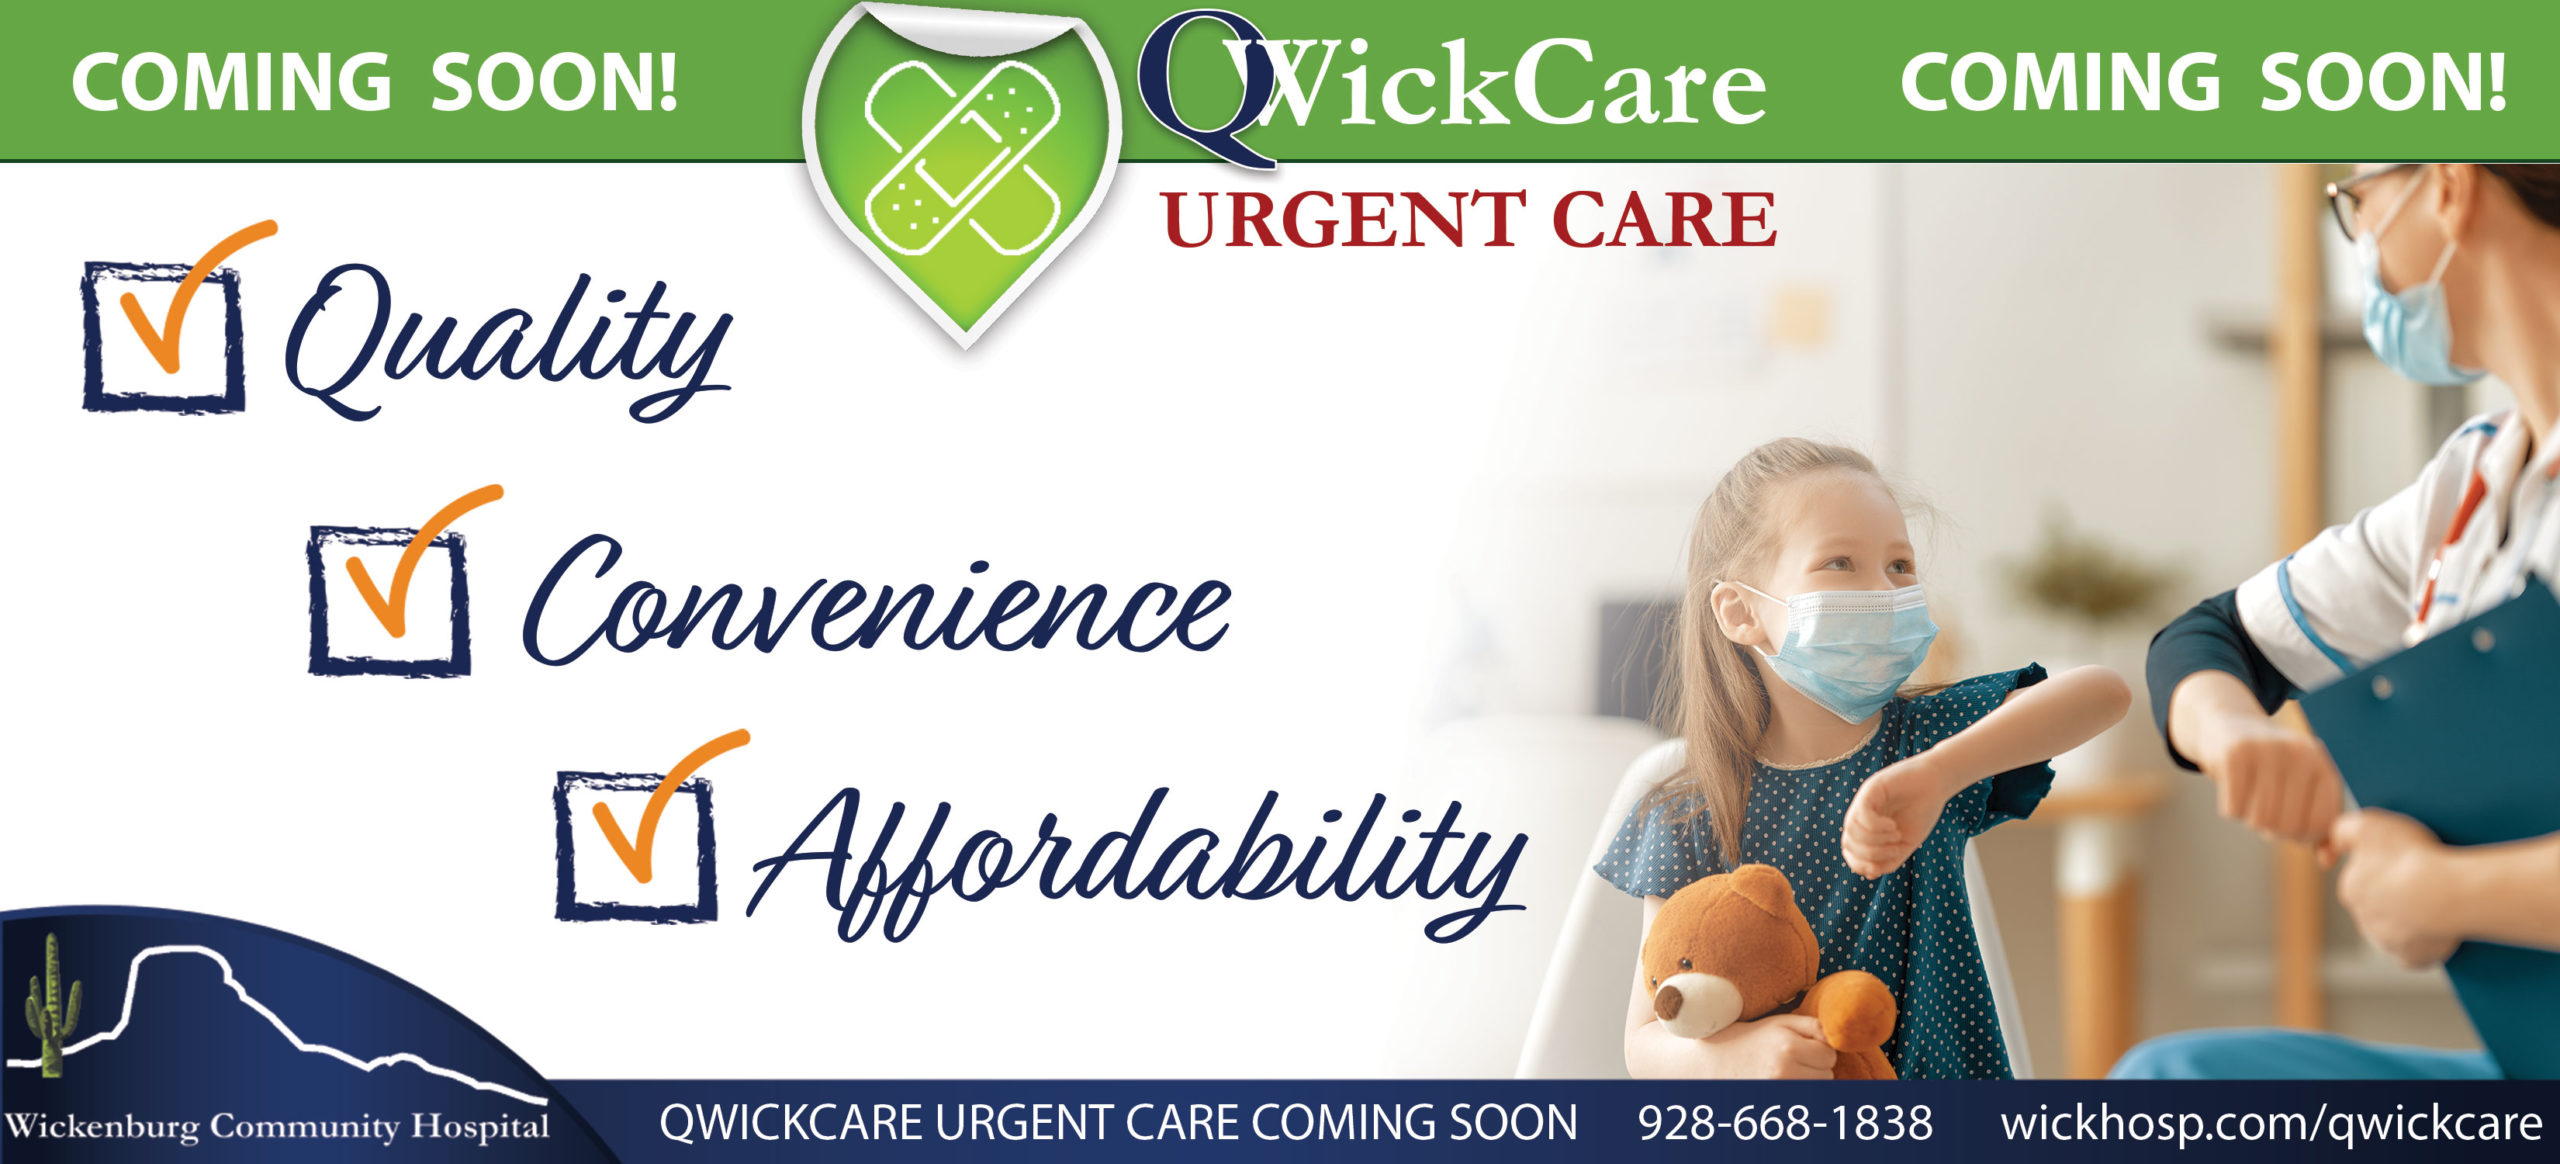 QwickCare Urgent Care Benefits to the Community